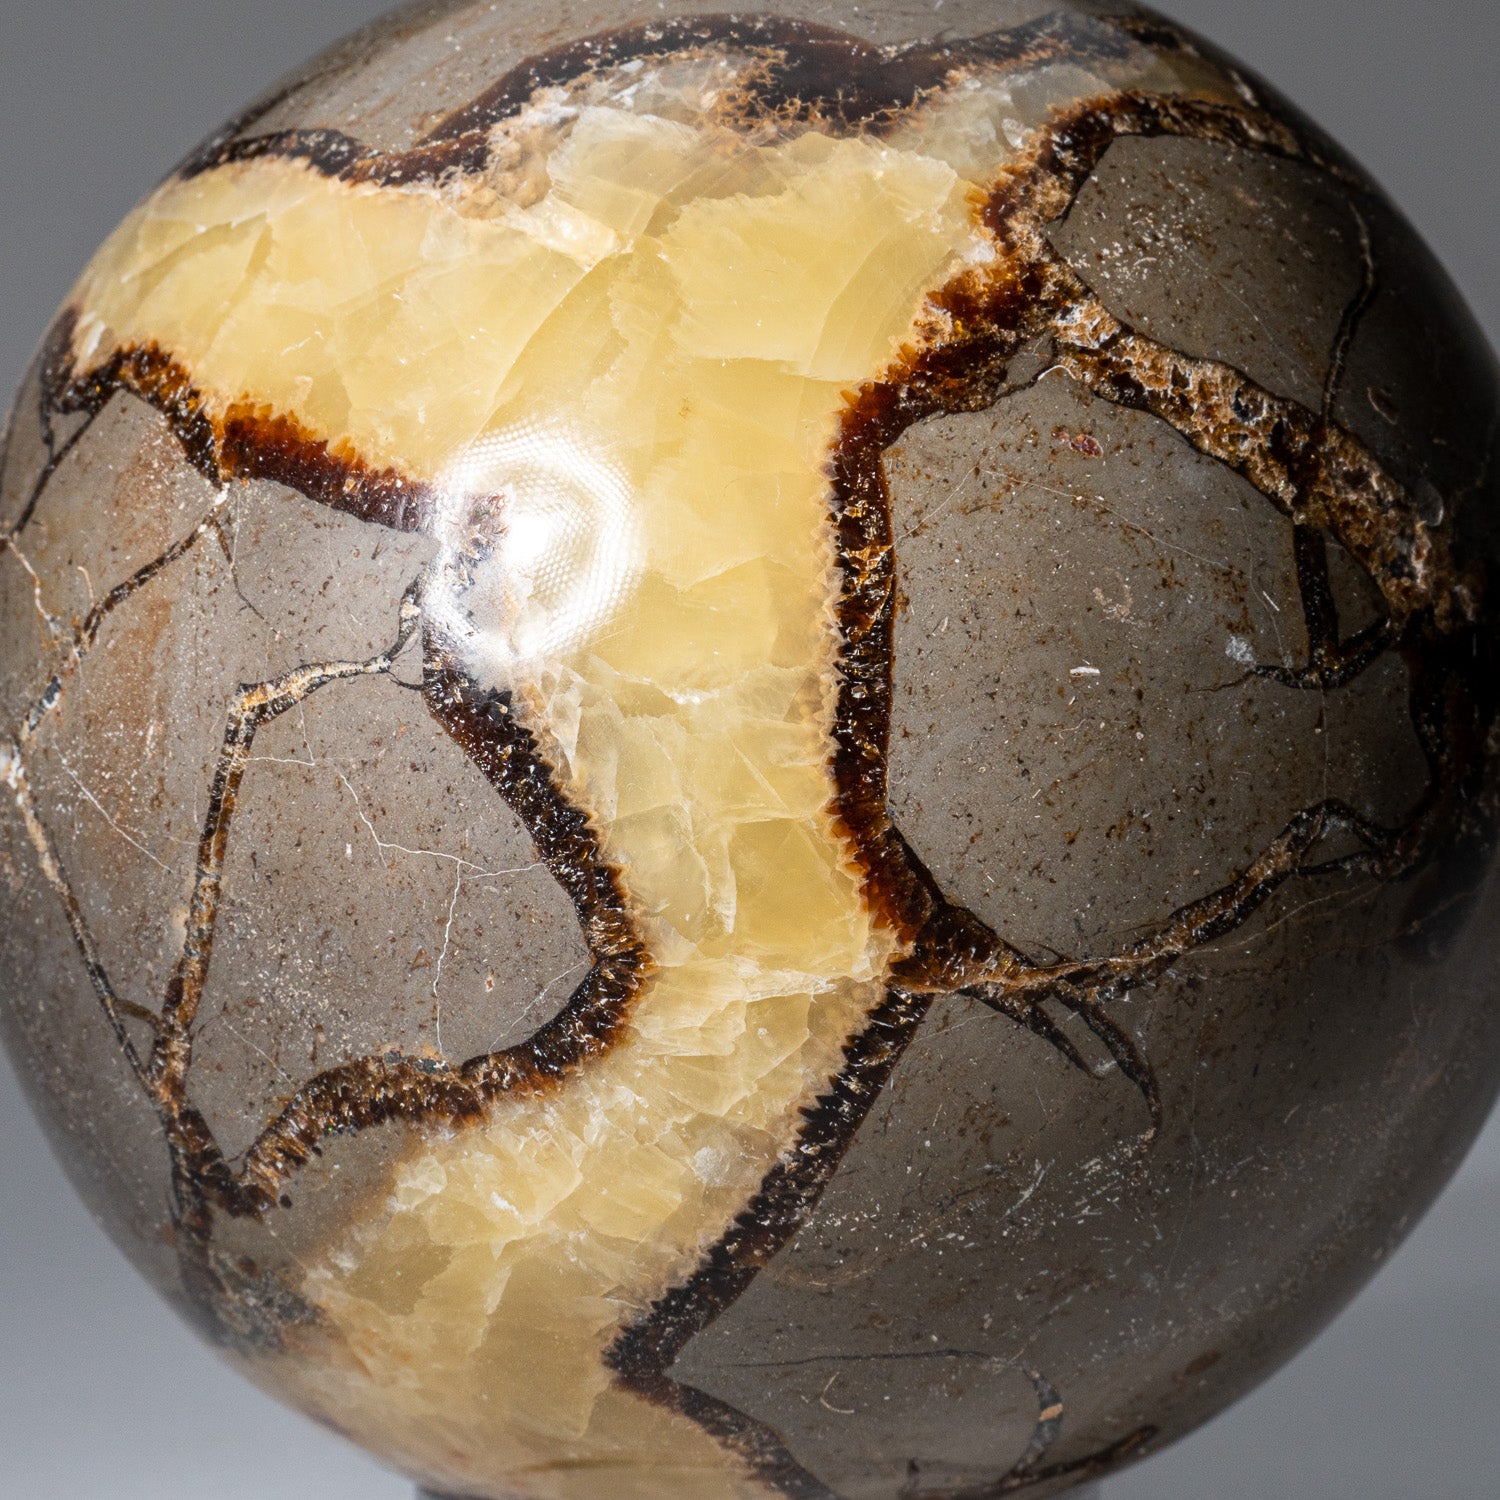 Genuine Polished Septarian Sphere from Madagascar (3.4 lbs)